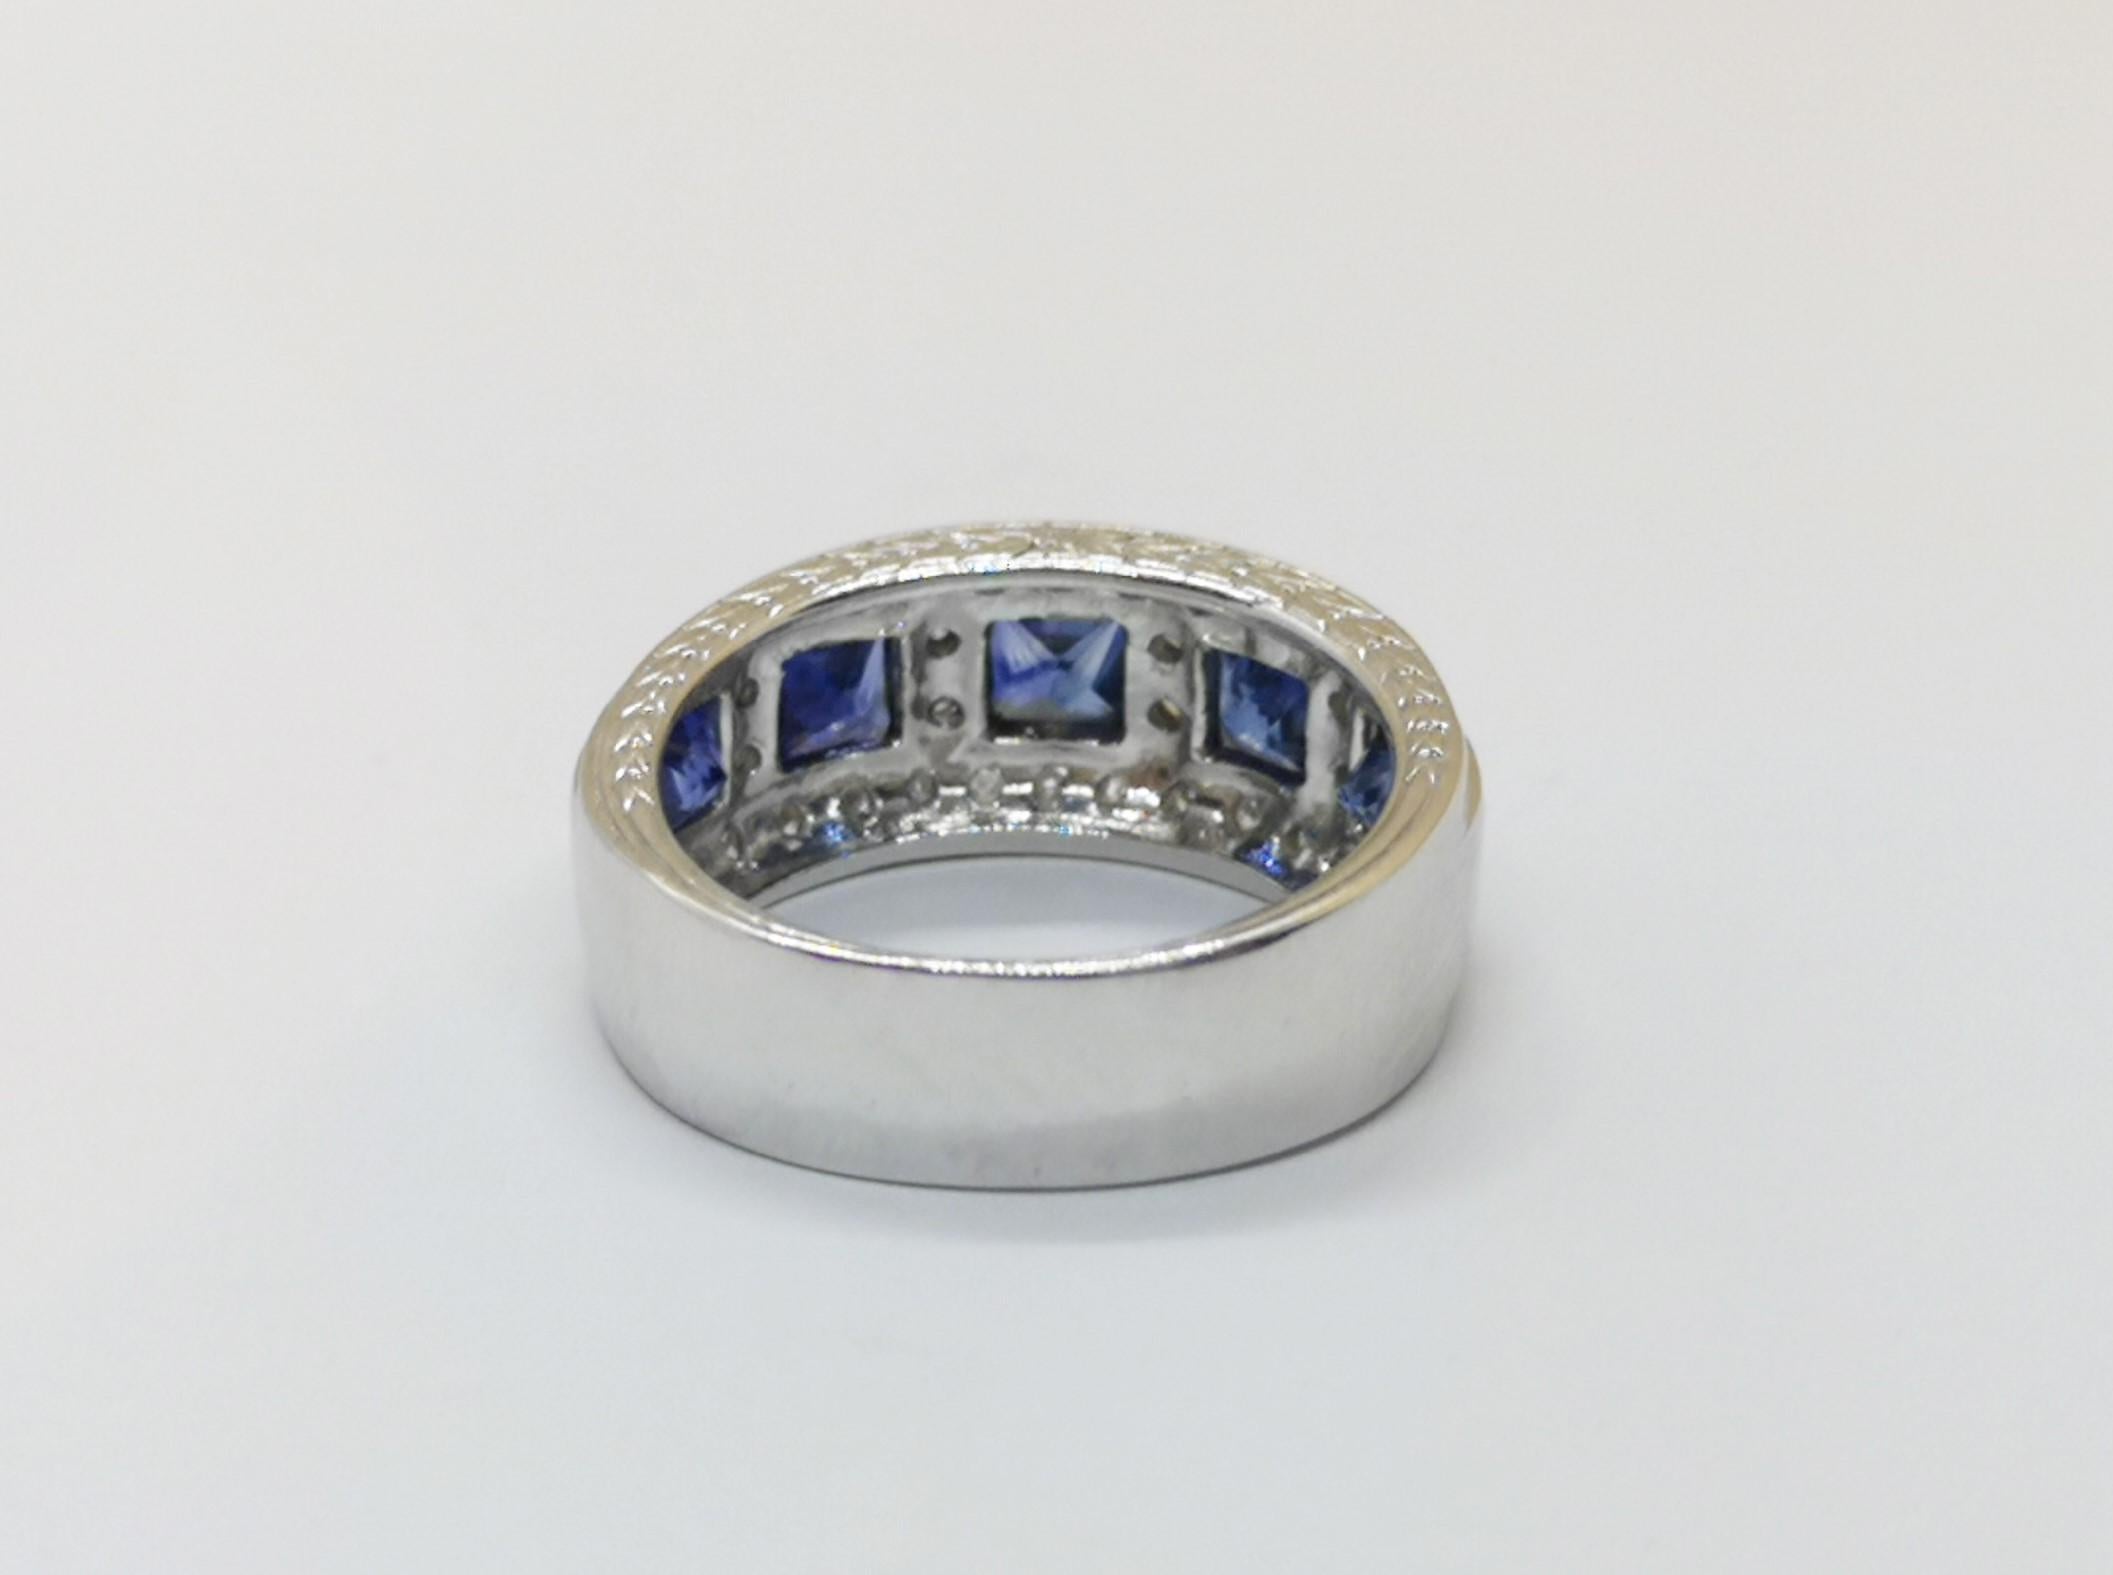 Blue Sapphire 2.12 carats with Diamond 0.37 carat Ring set in 18 Karat White Gold Settings

Width: 2.0 cm
Length: 0.9 cm 
Ring Size: 54

